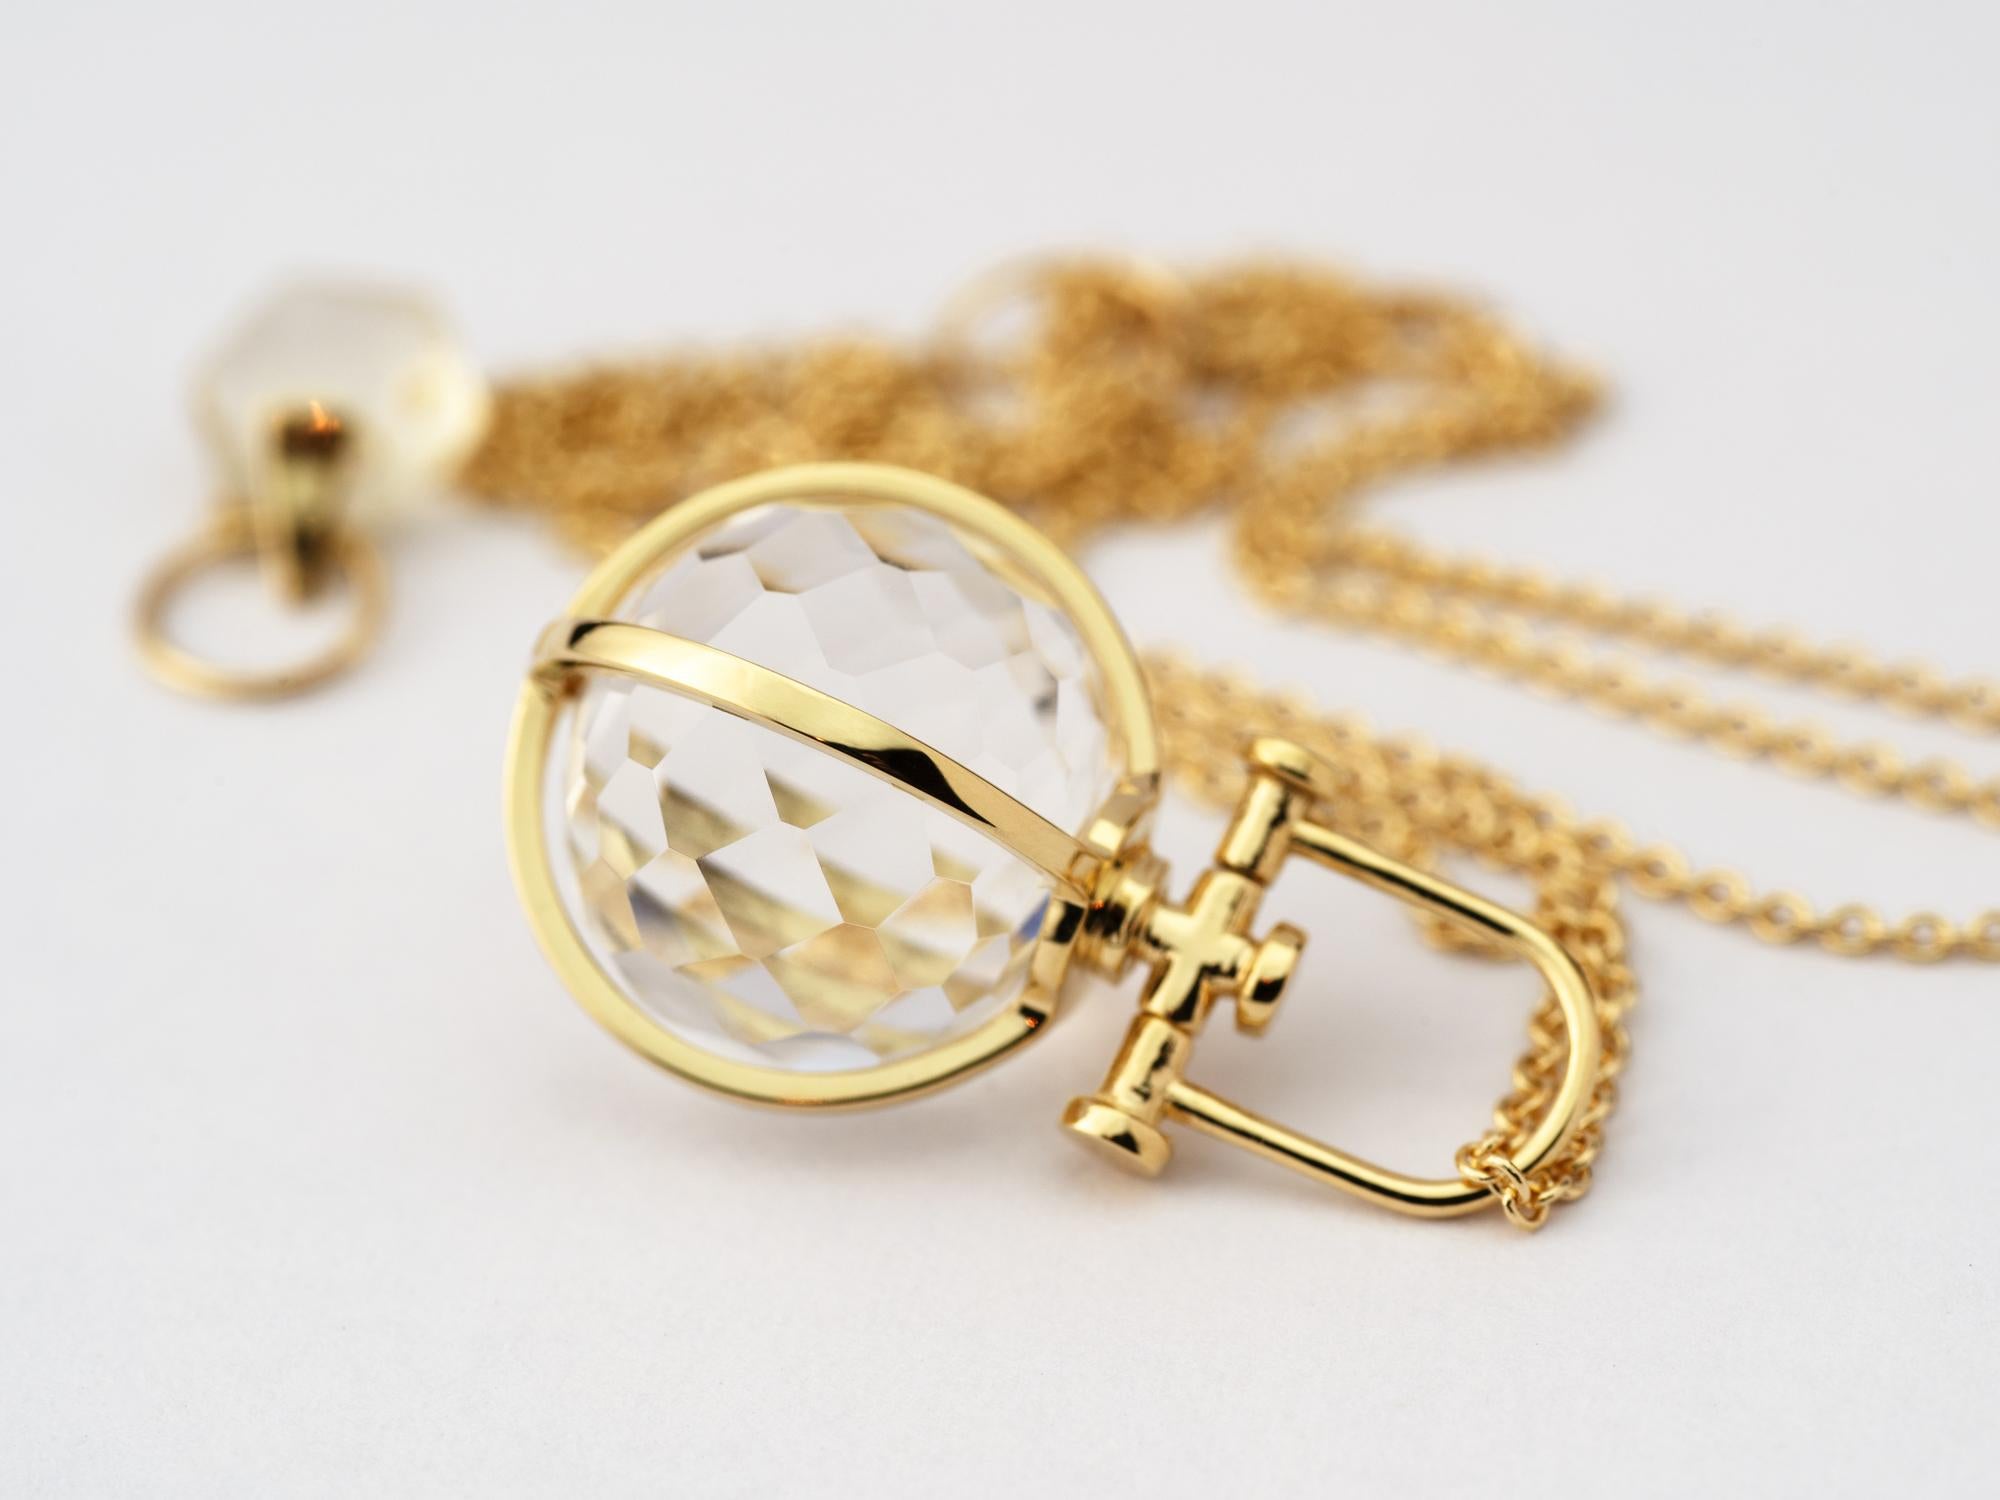 Rebecca Li designs mindfulness. 
This small crystal orb necklace is from her Crystal Ball Collection.
Rock Crystal is considered to be master healer stone. It means manifestation, positivity and luck.

Pendant:
Metal Type: 18K Yellow Gold
Gemstone: